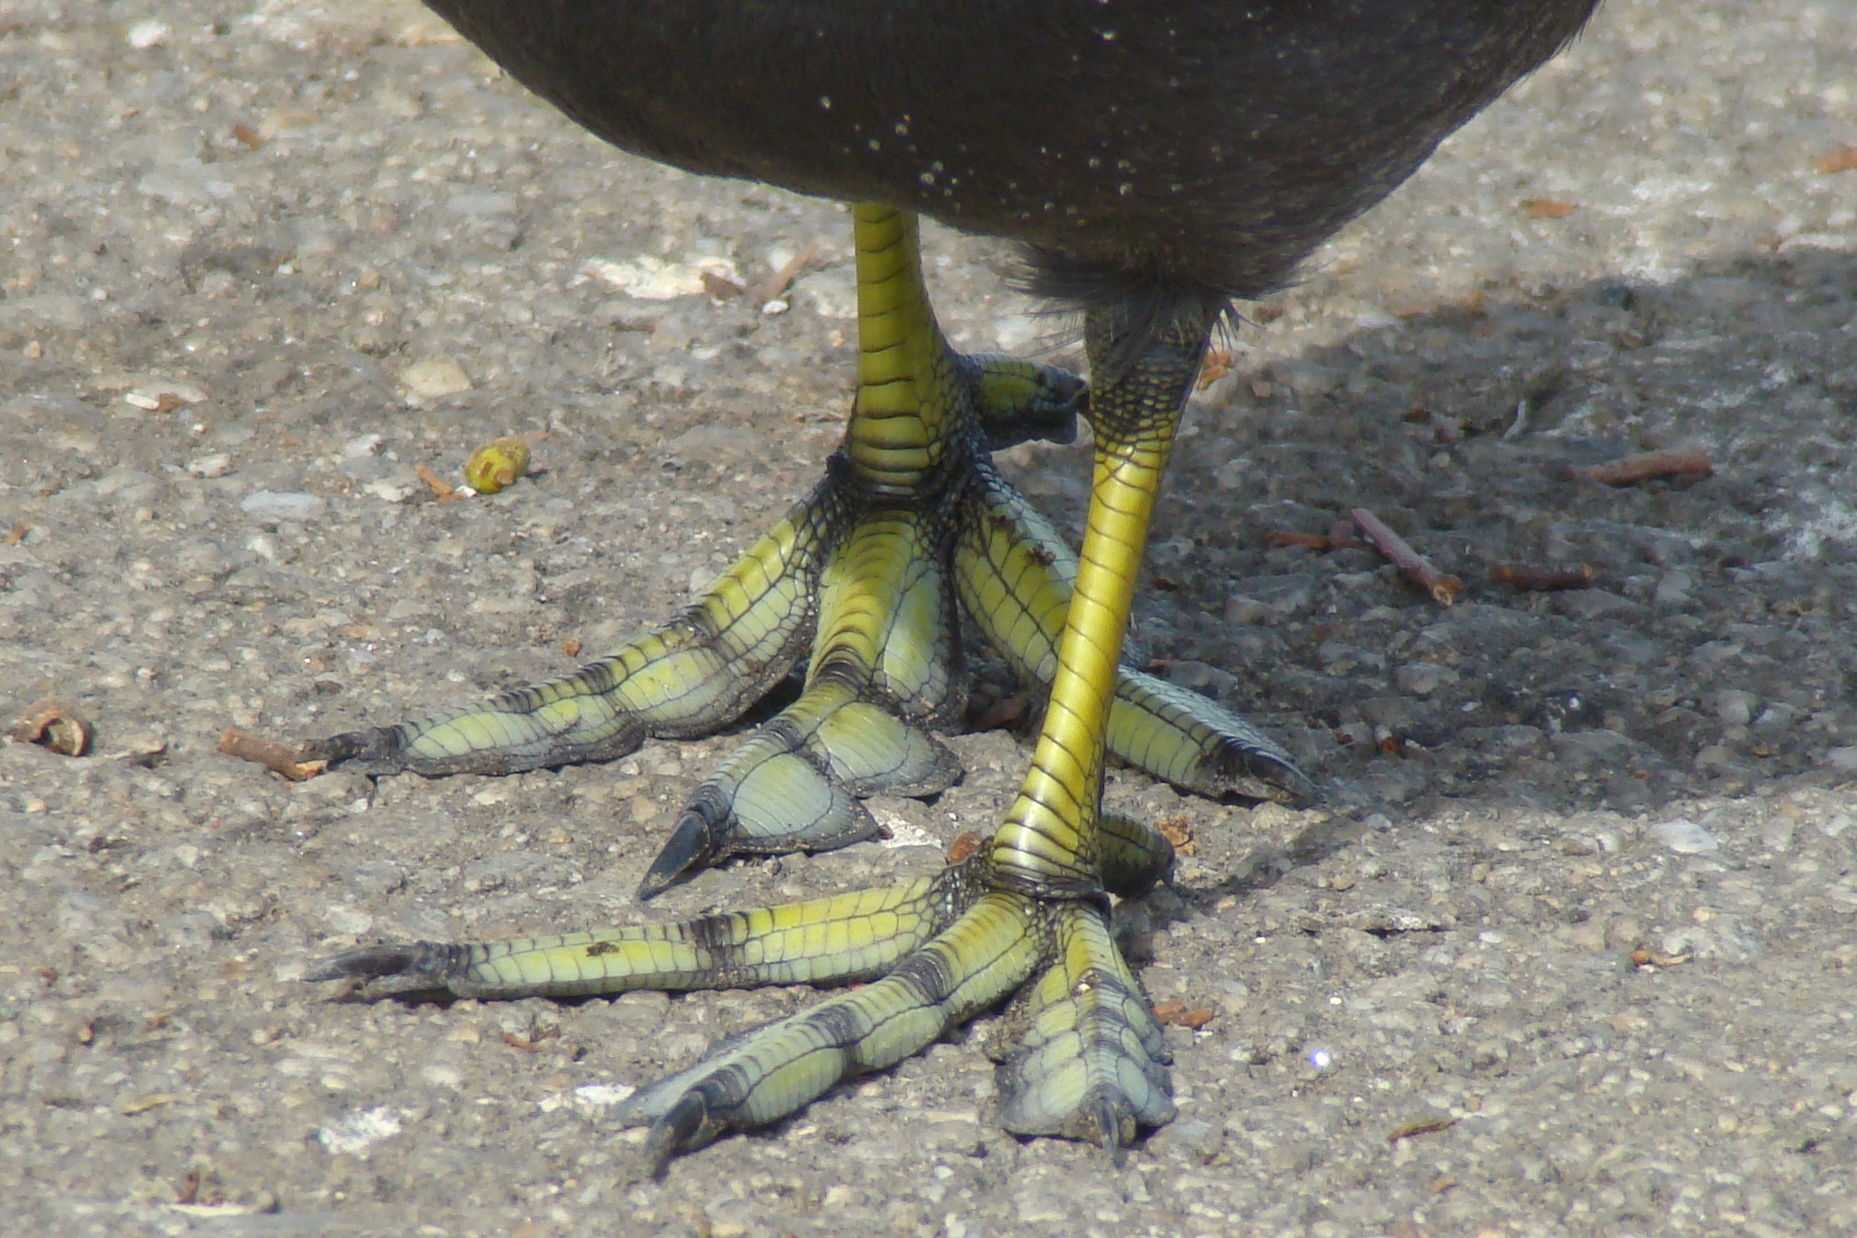 American Coot feet from http://www.flickr.com/photos/slomaggie/4090097281/